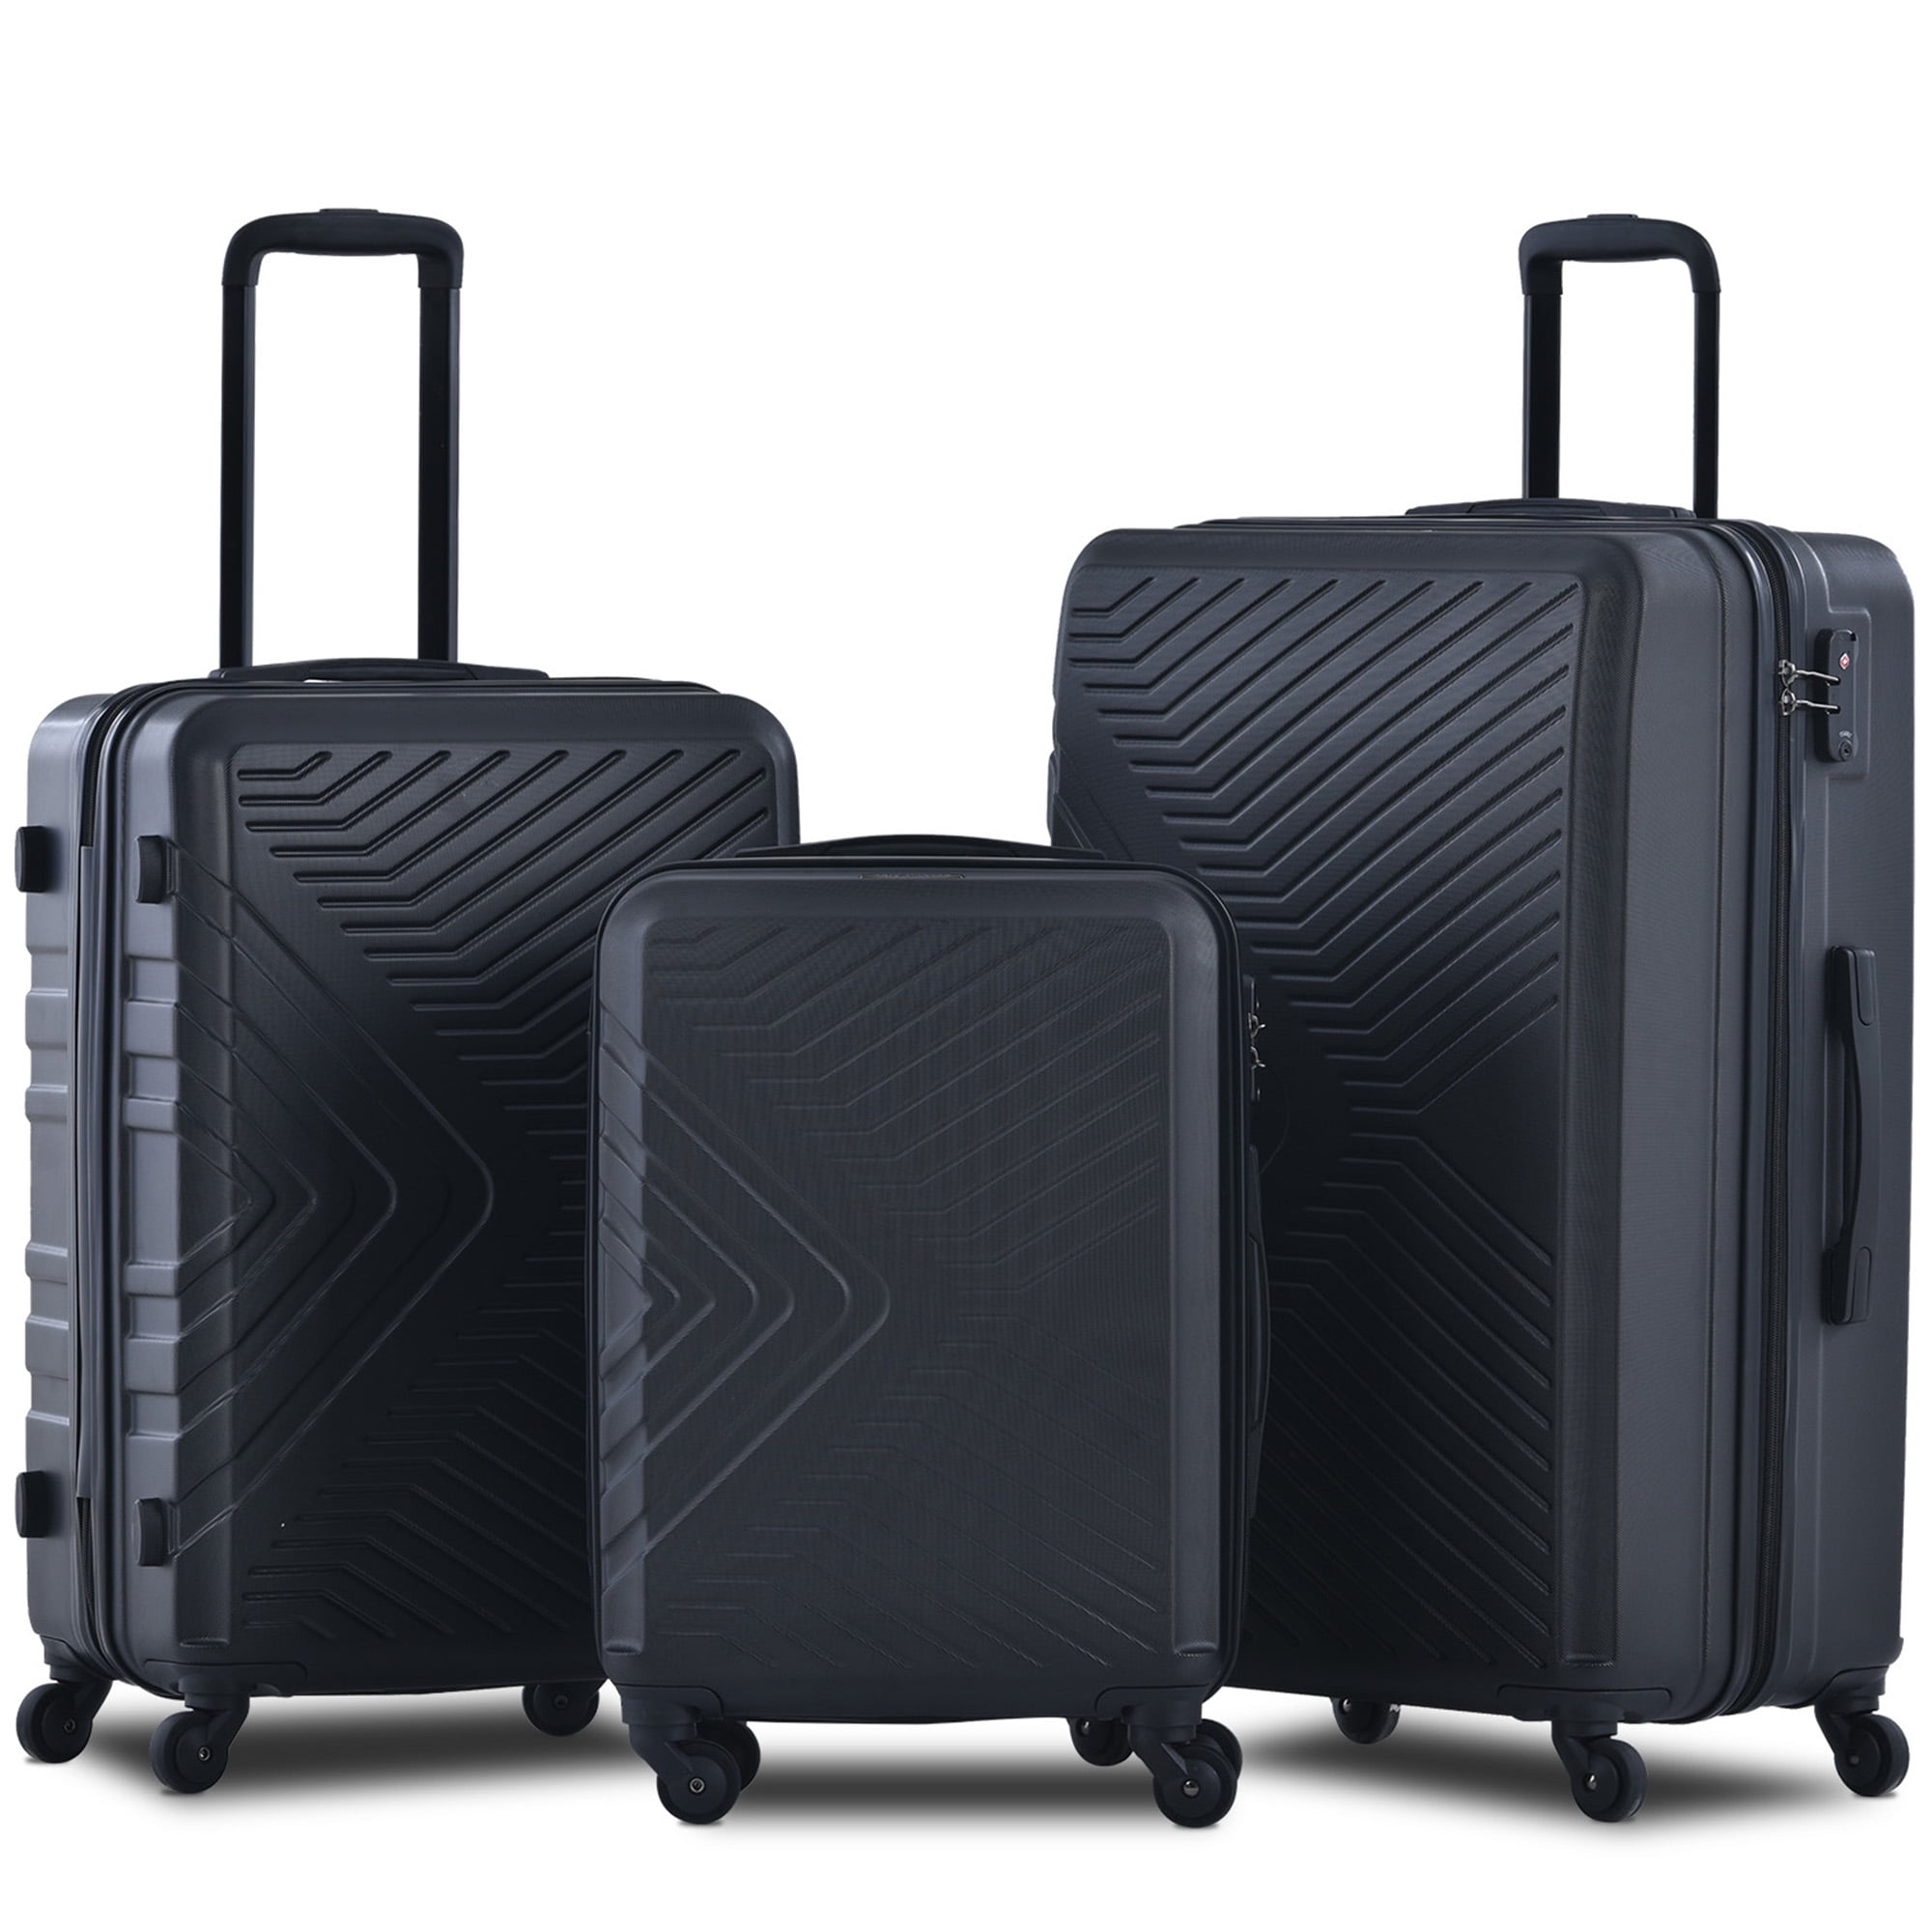 Compared with hard cases, do you know the advantages of soft trolley bags?